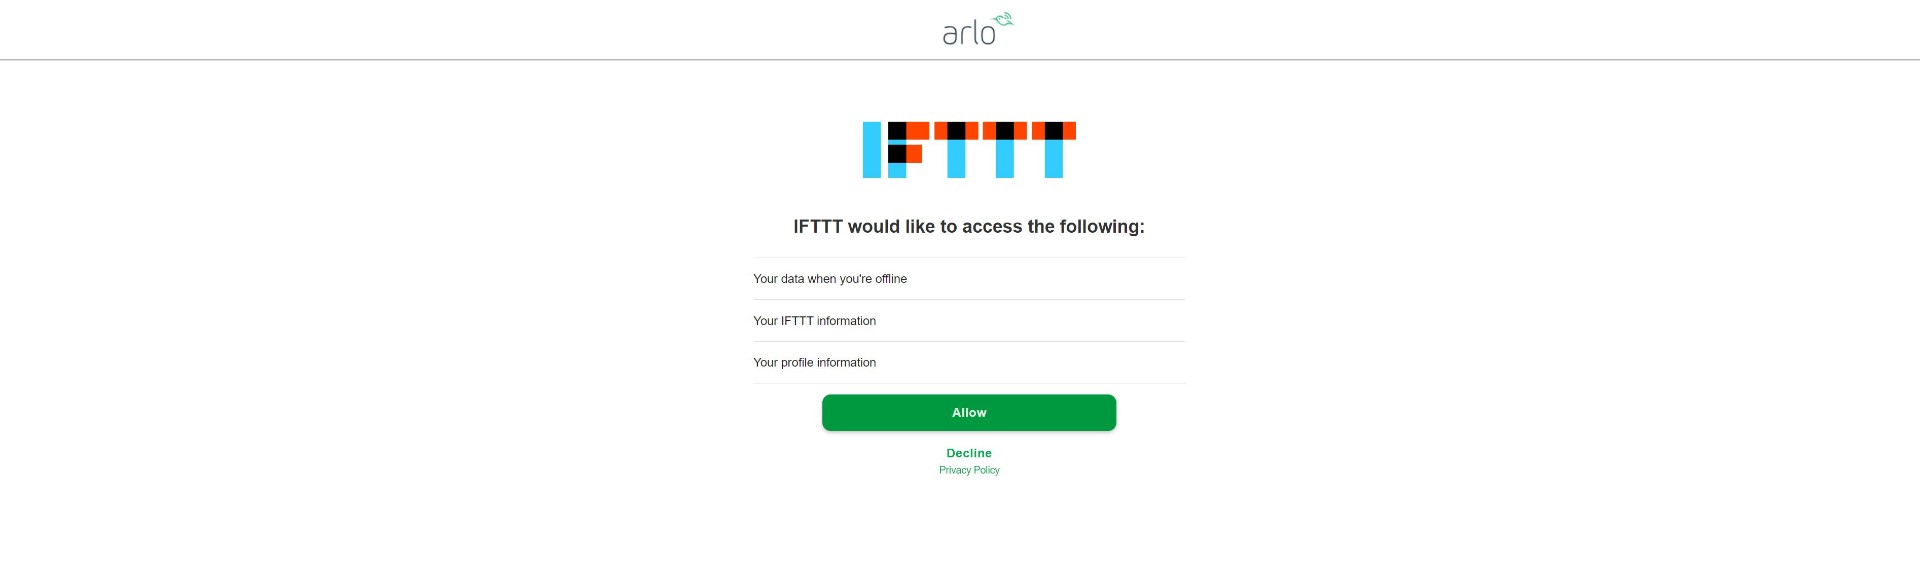 How To Connect Arlo with IFTTT